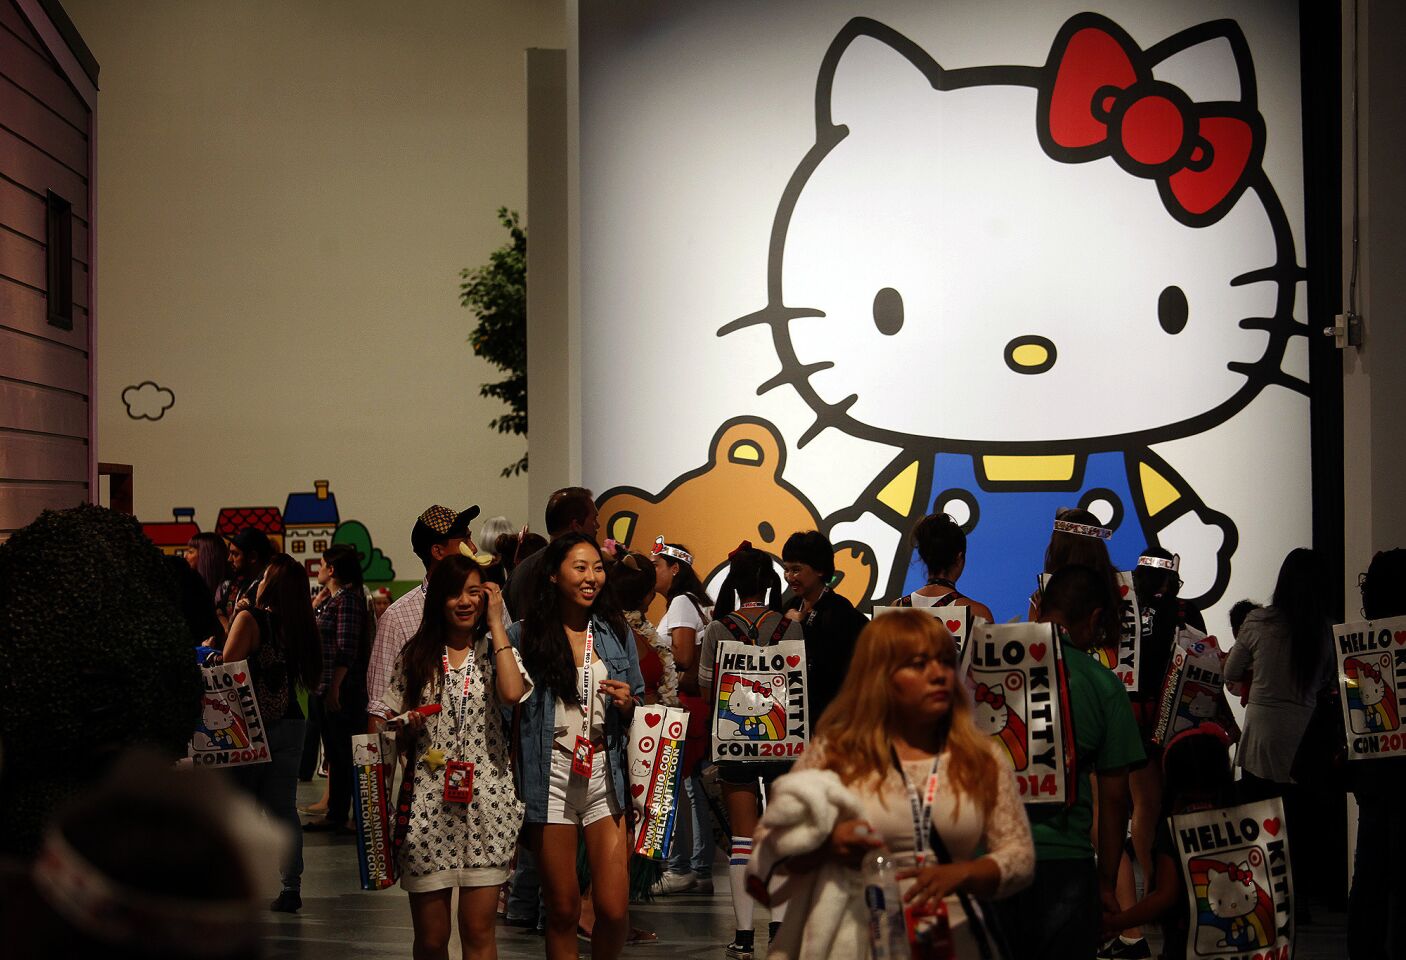 Visitors at the Museum of Contemporary Art's Geffen building on the first day of Hello Kitty Con. The first convention celebrating Hello Kitty was held Oct. 30 through Nov. 2.